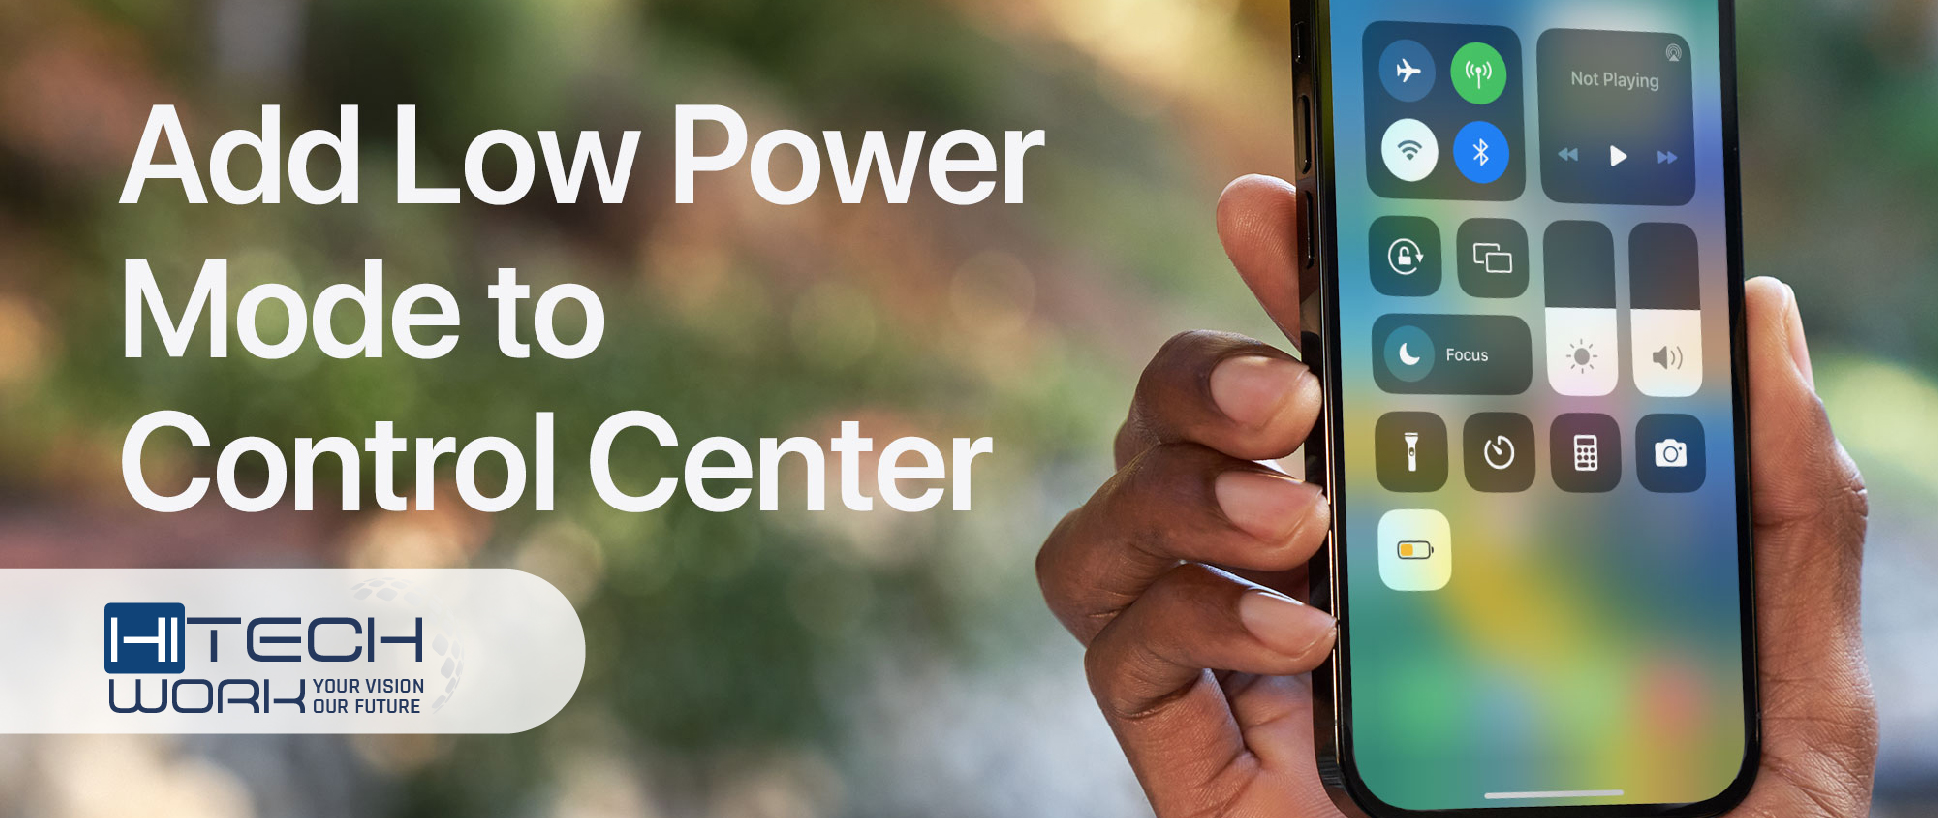 Add low power mode to control center